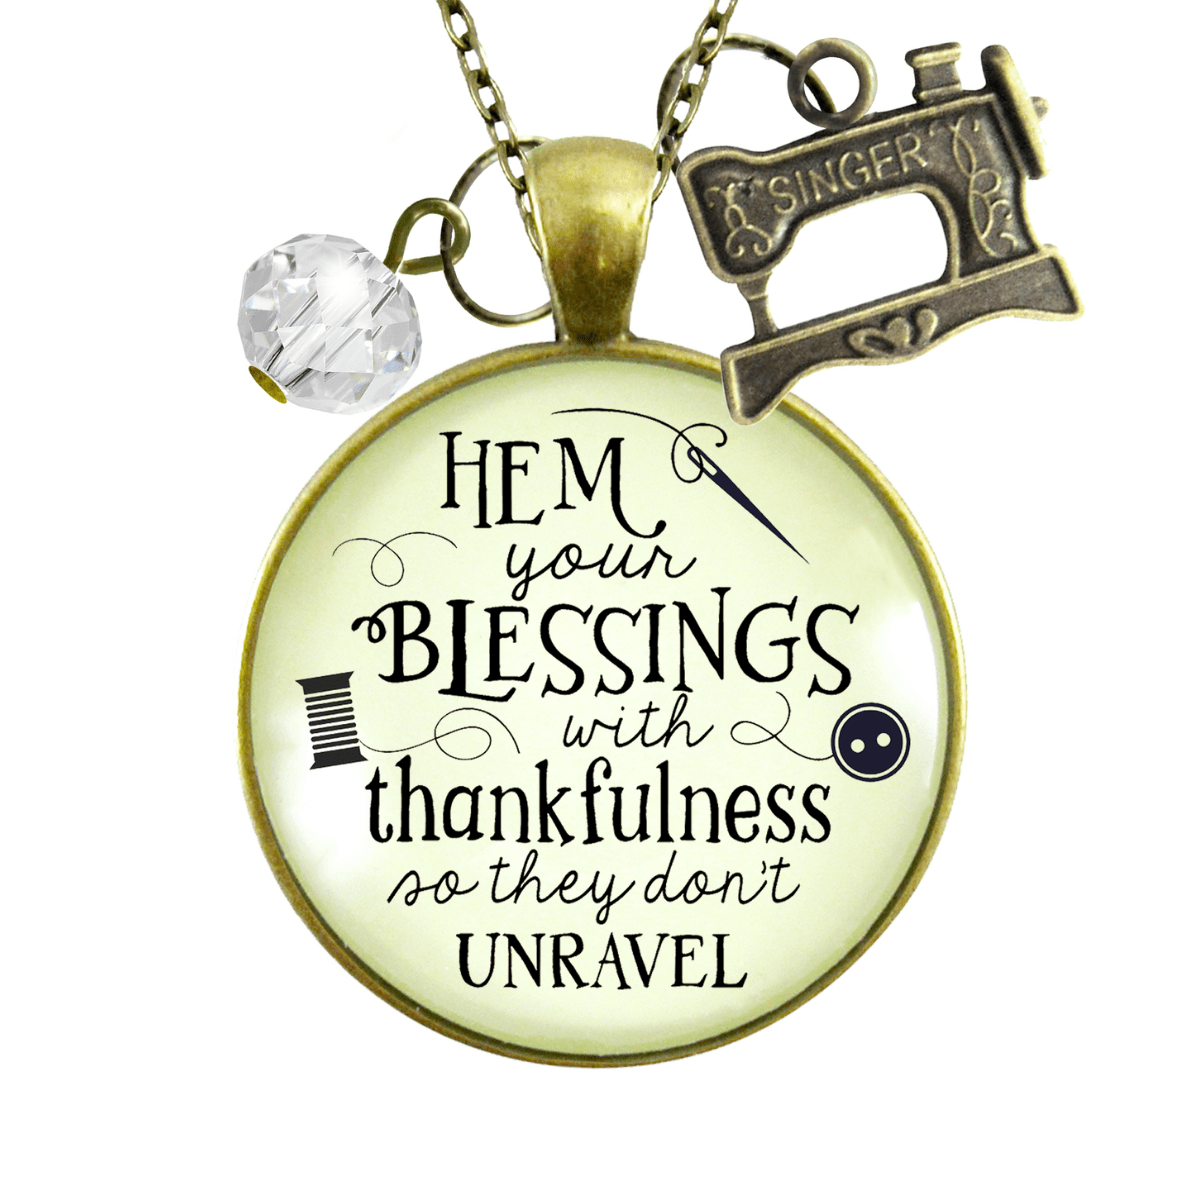 Gutsy Goodness Seamstress Necklace Hem Blessings Thankful Sewing Jewelry Gift - Gutsy Goodness;Seamstress Necklace Hem Blessings Thankful Sewing Jewelry Gift - Gutsy Goodness Handmade Jewelry Gifts